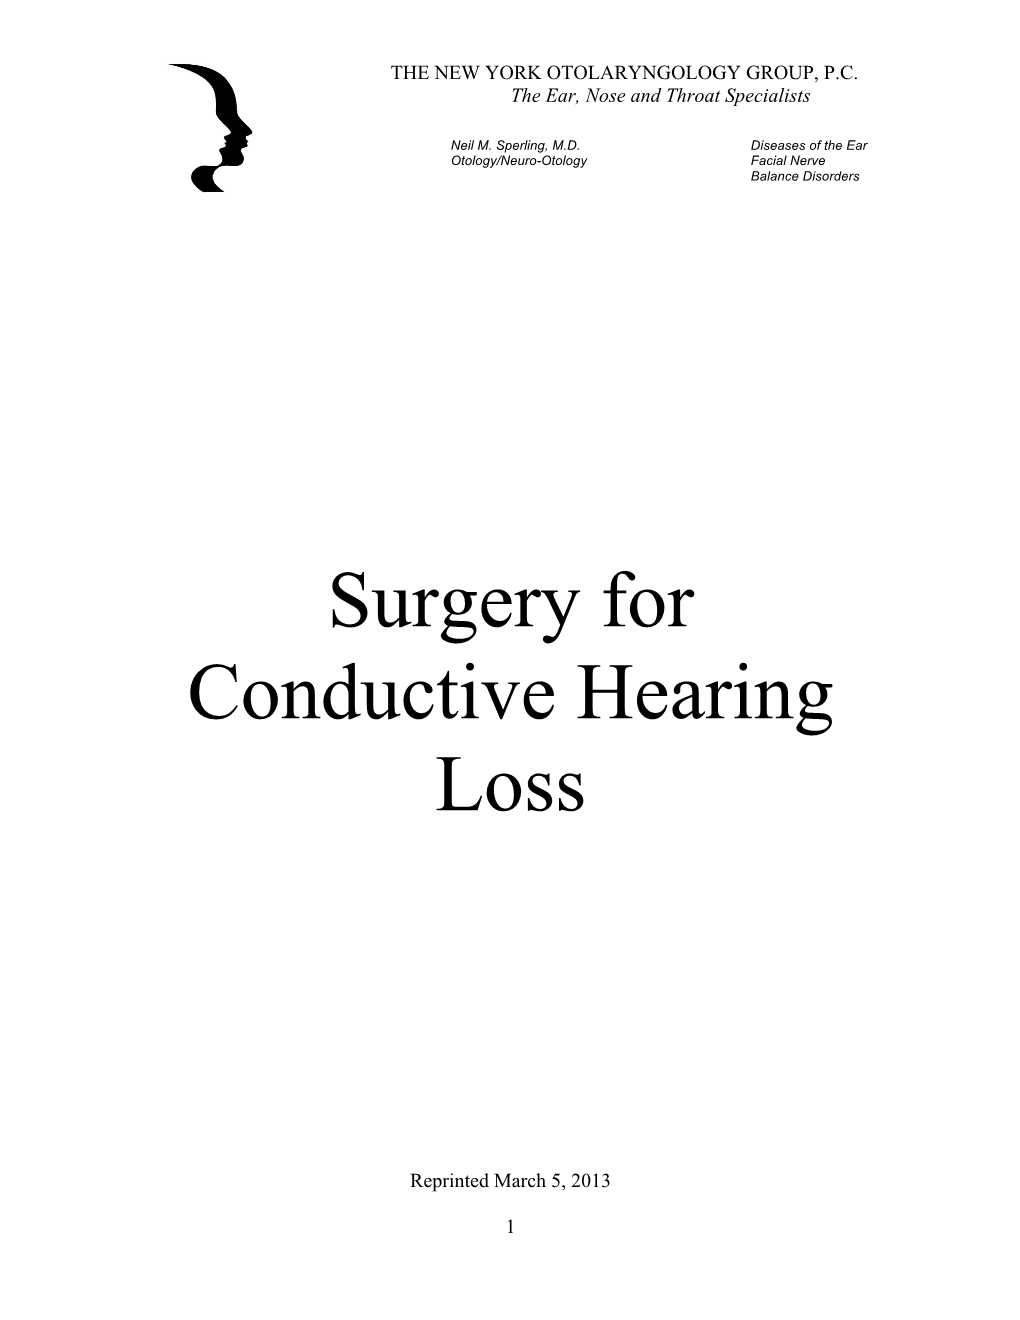 Download Dr. Sperling's PDF on Surgery for Conductive Hearing Loss